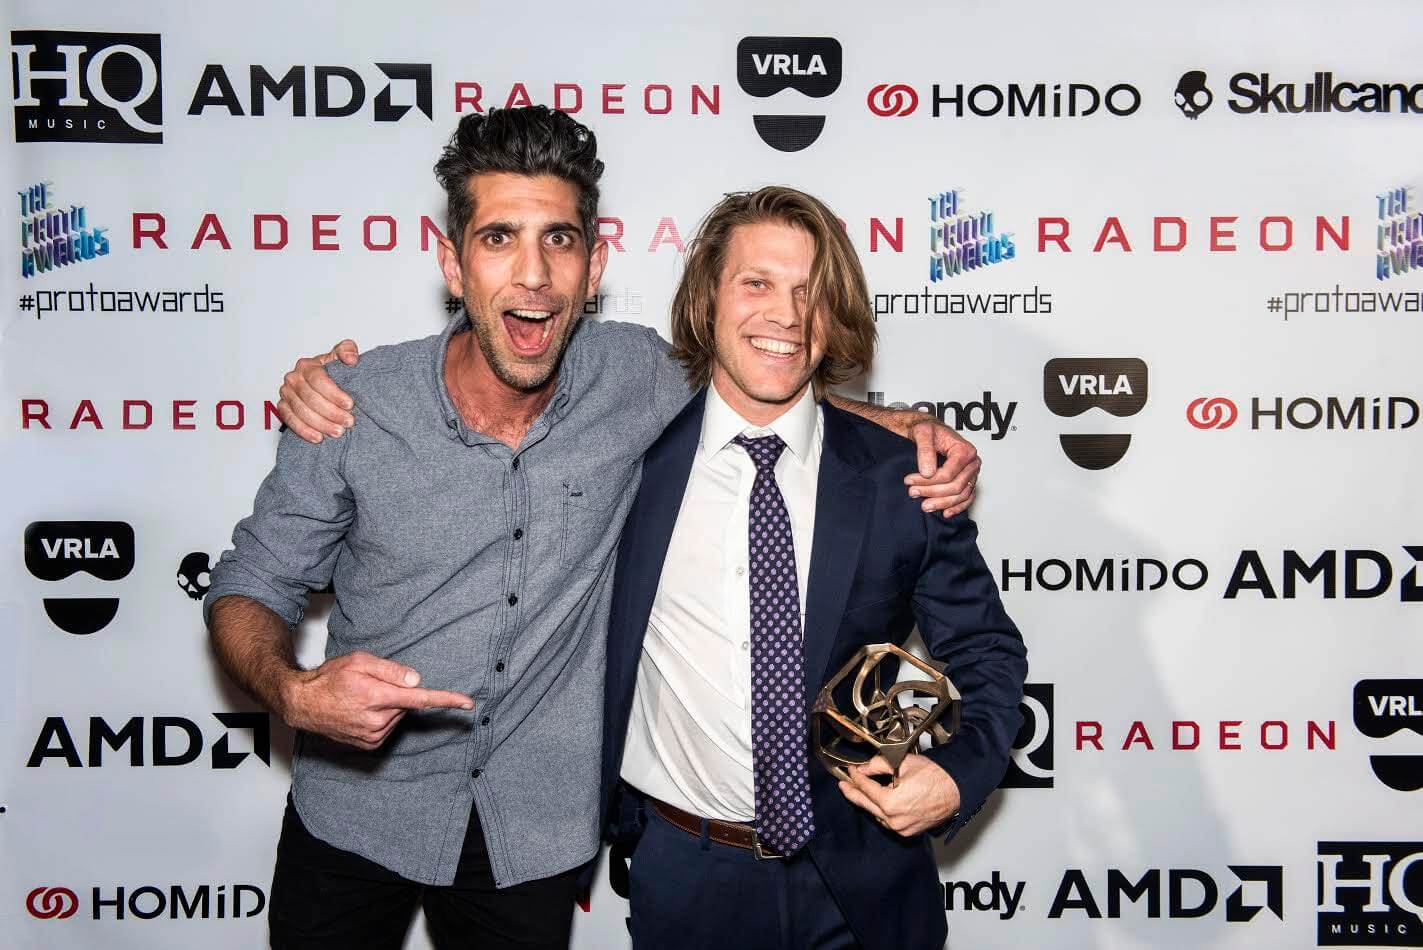 A bold step and repeat for the Proto Awards